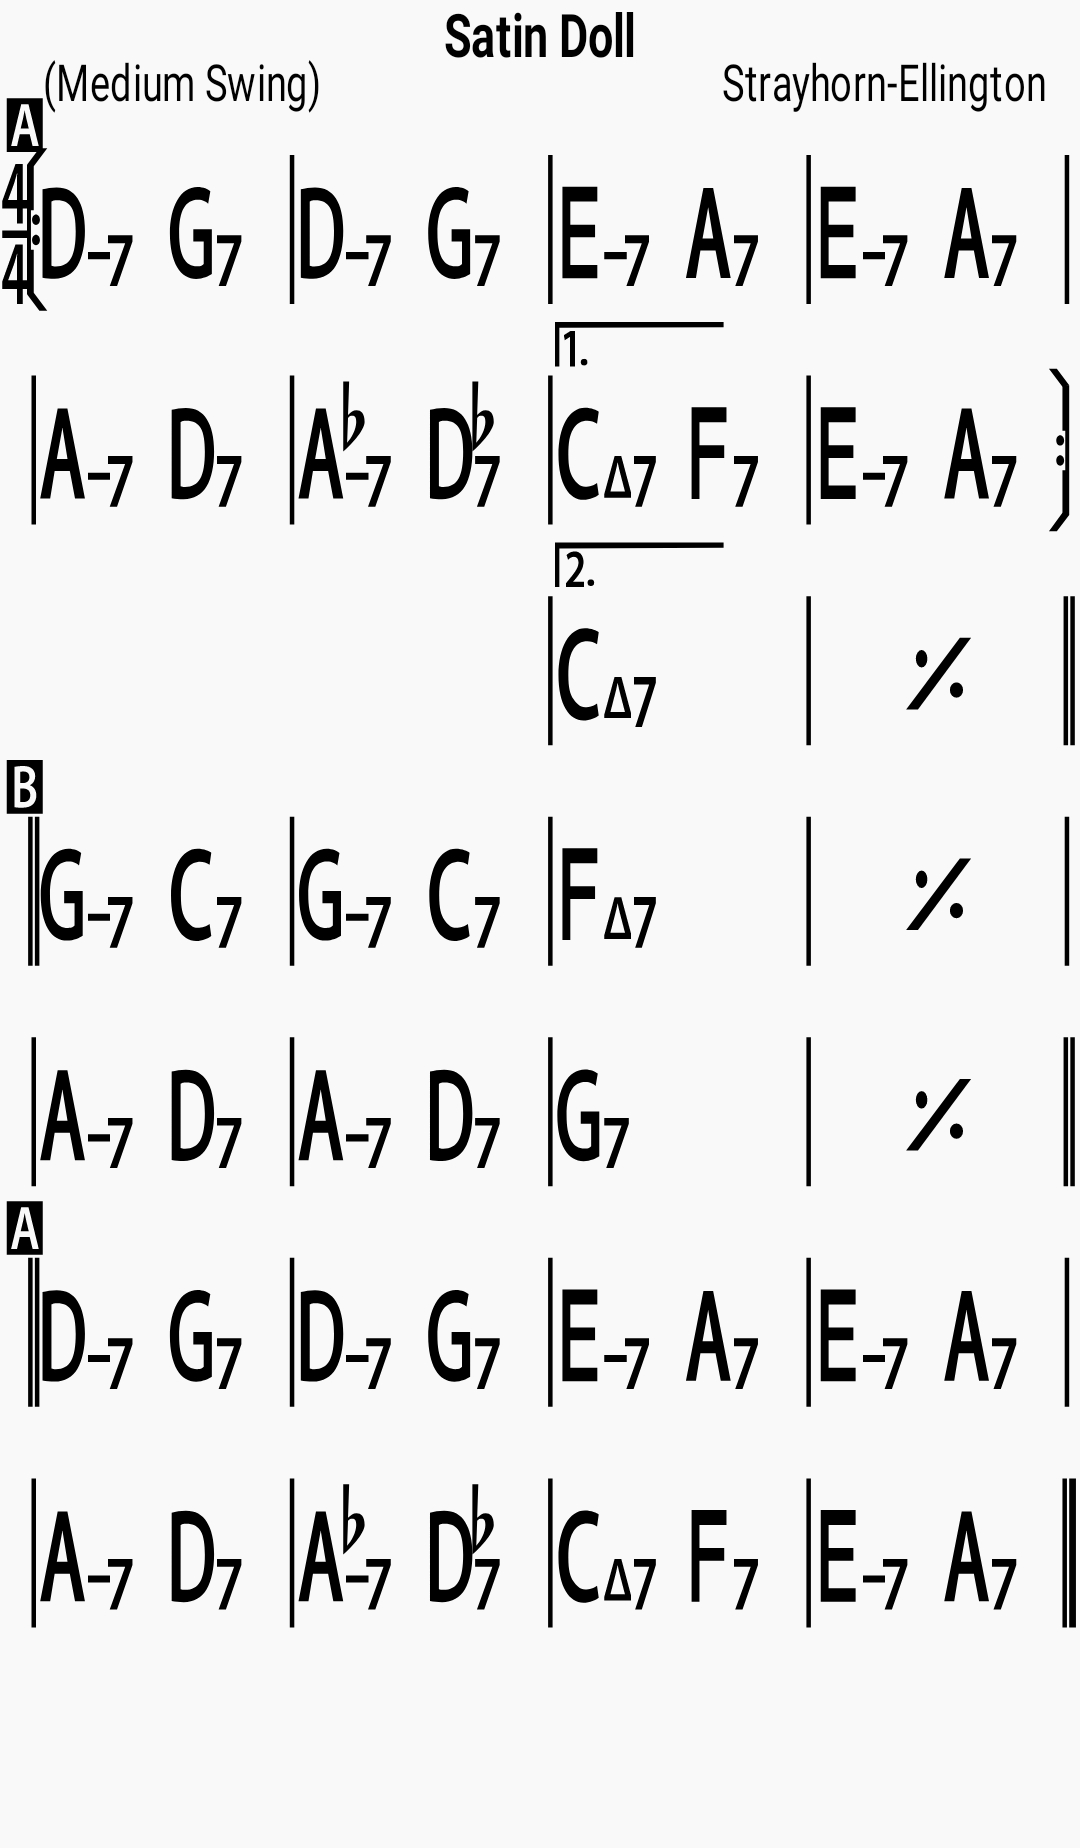 Chord chart for the jazz standard Satin Doll